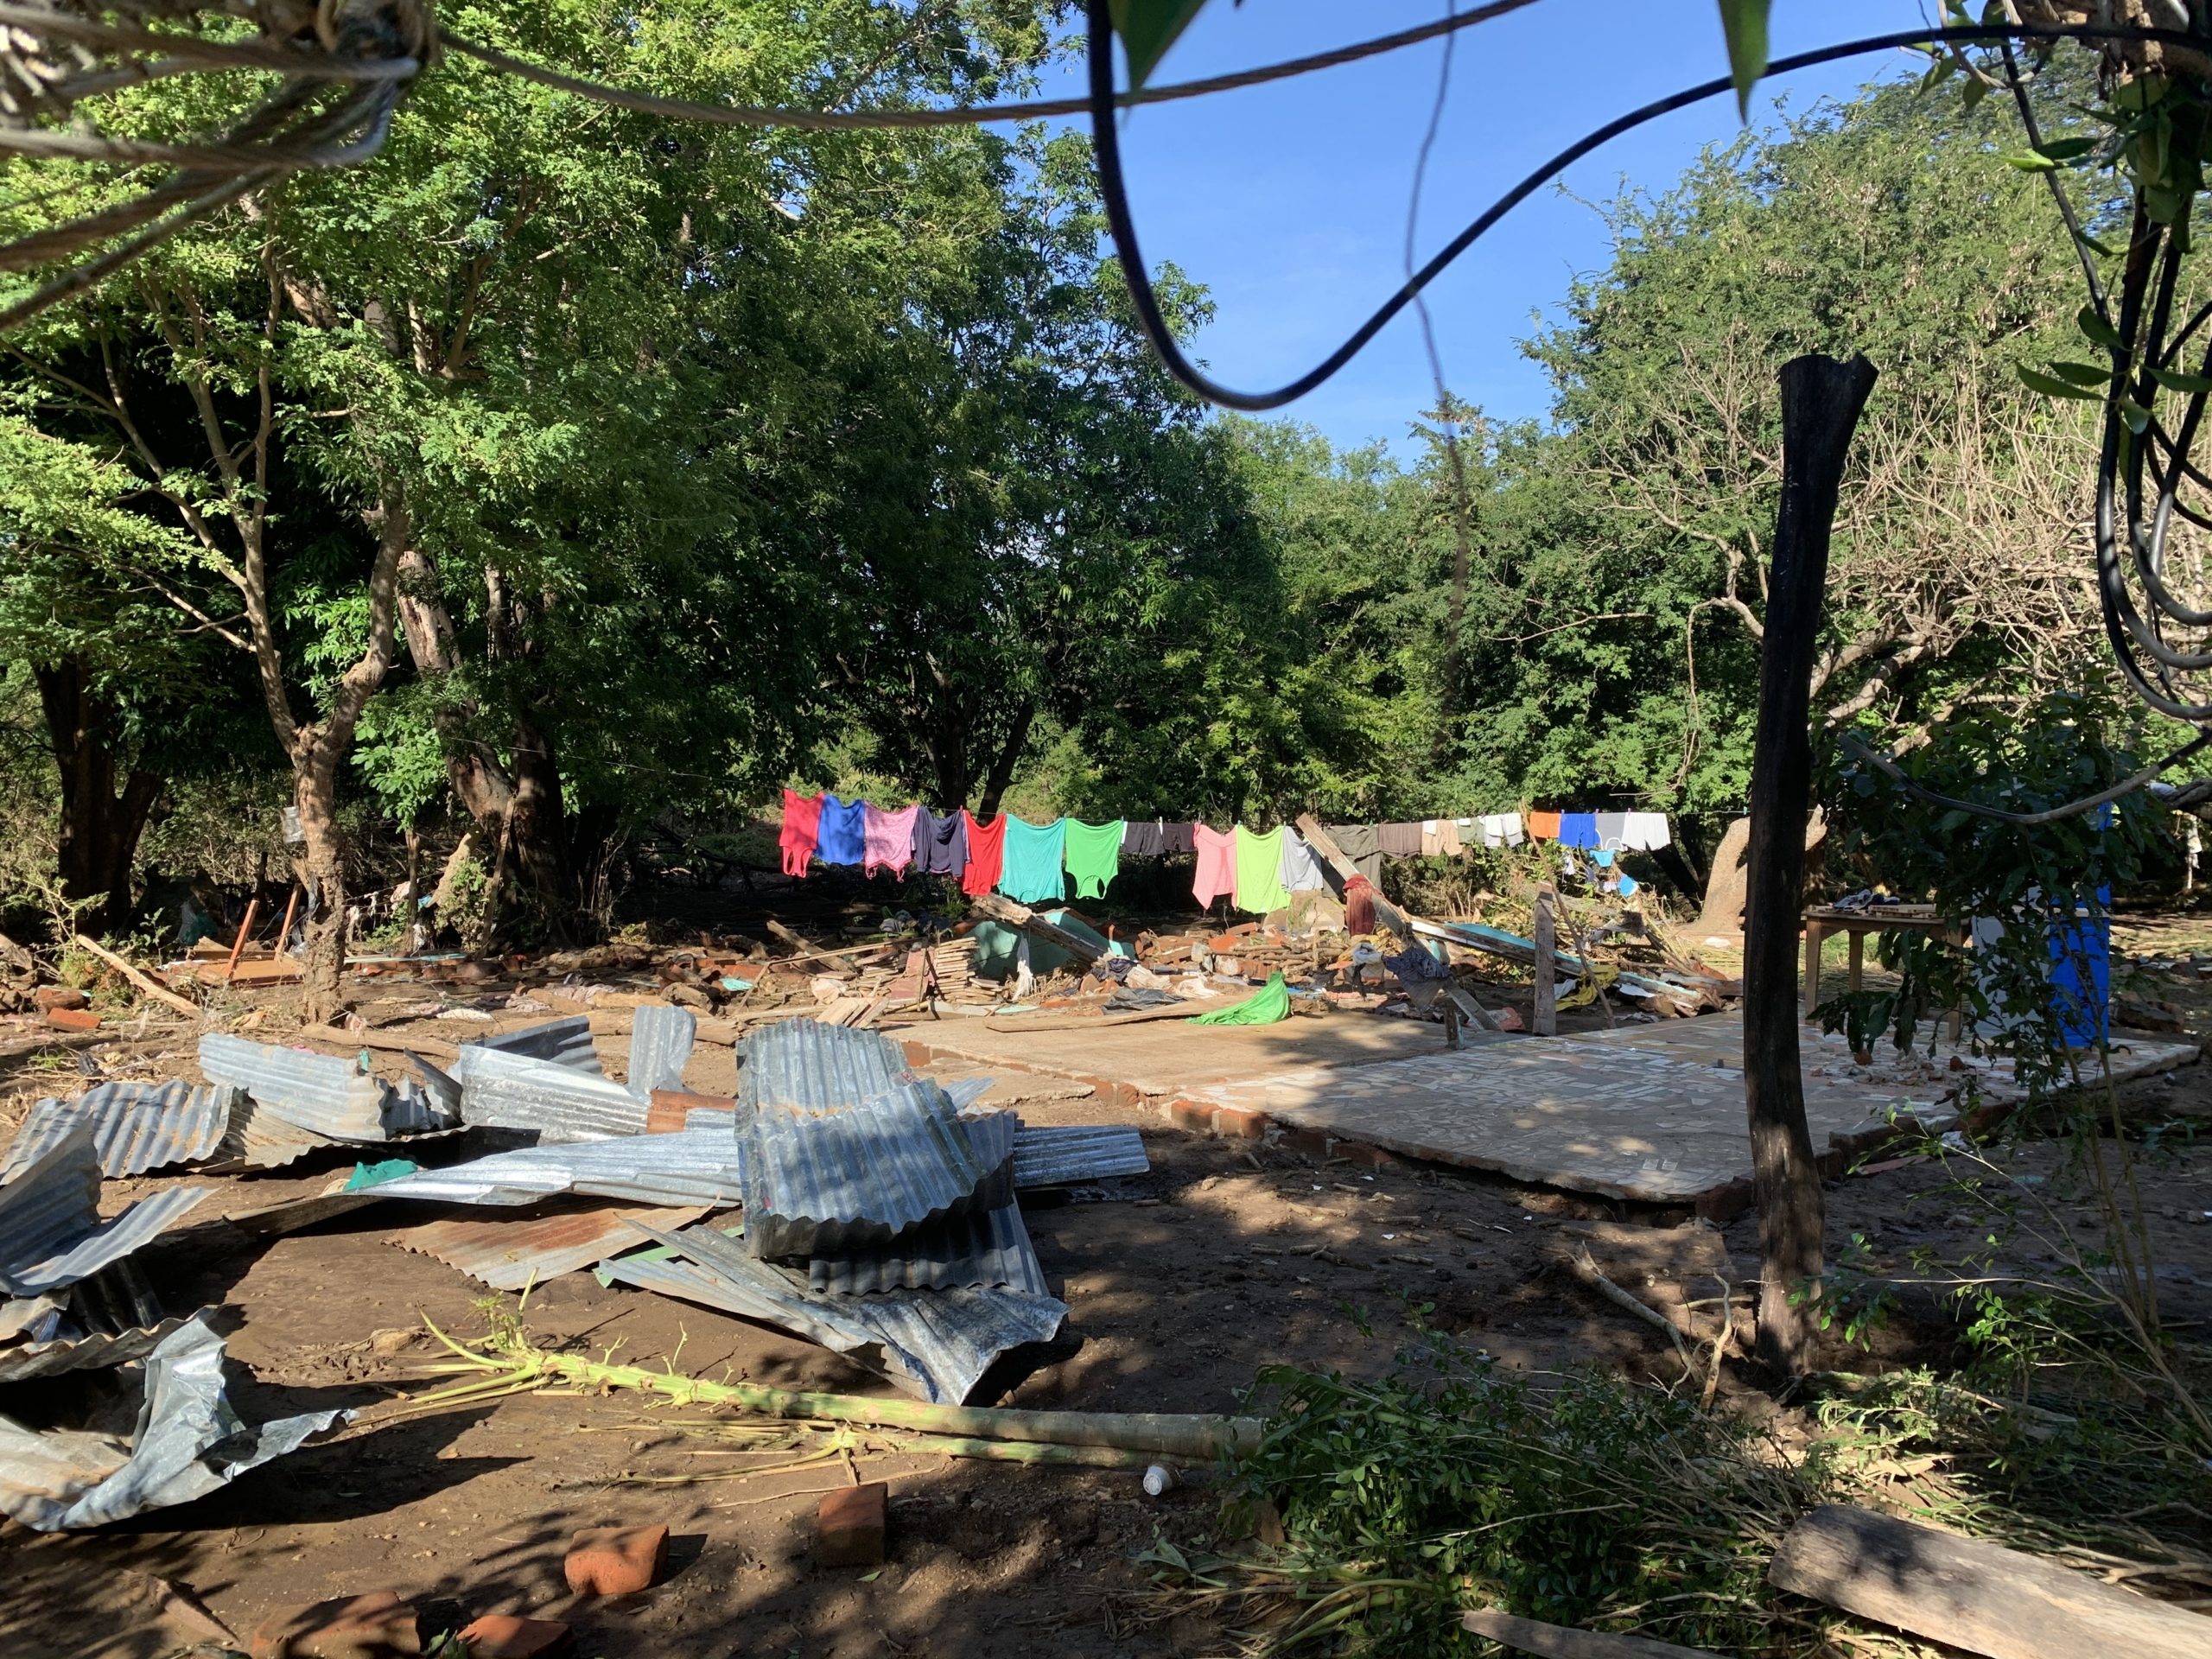 Volunteers from different communities help divide and repackage donations before distributing them to neighborhoods destroyed by hurricane flooding and high winds in Nicaragua.